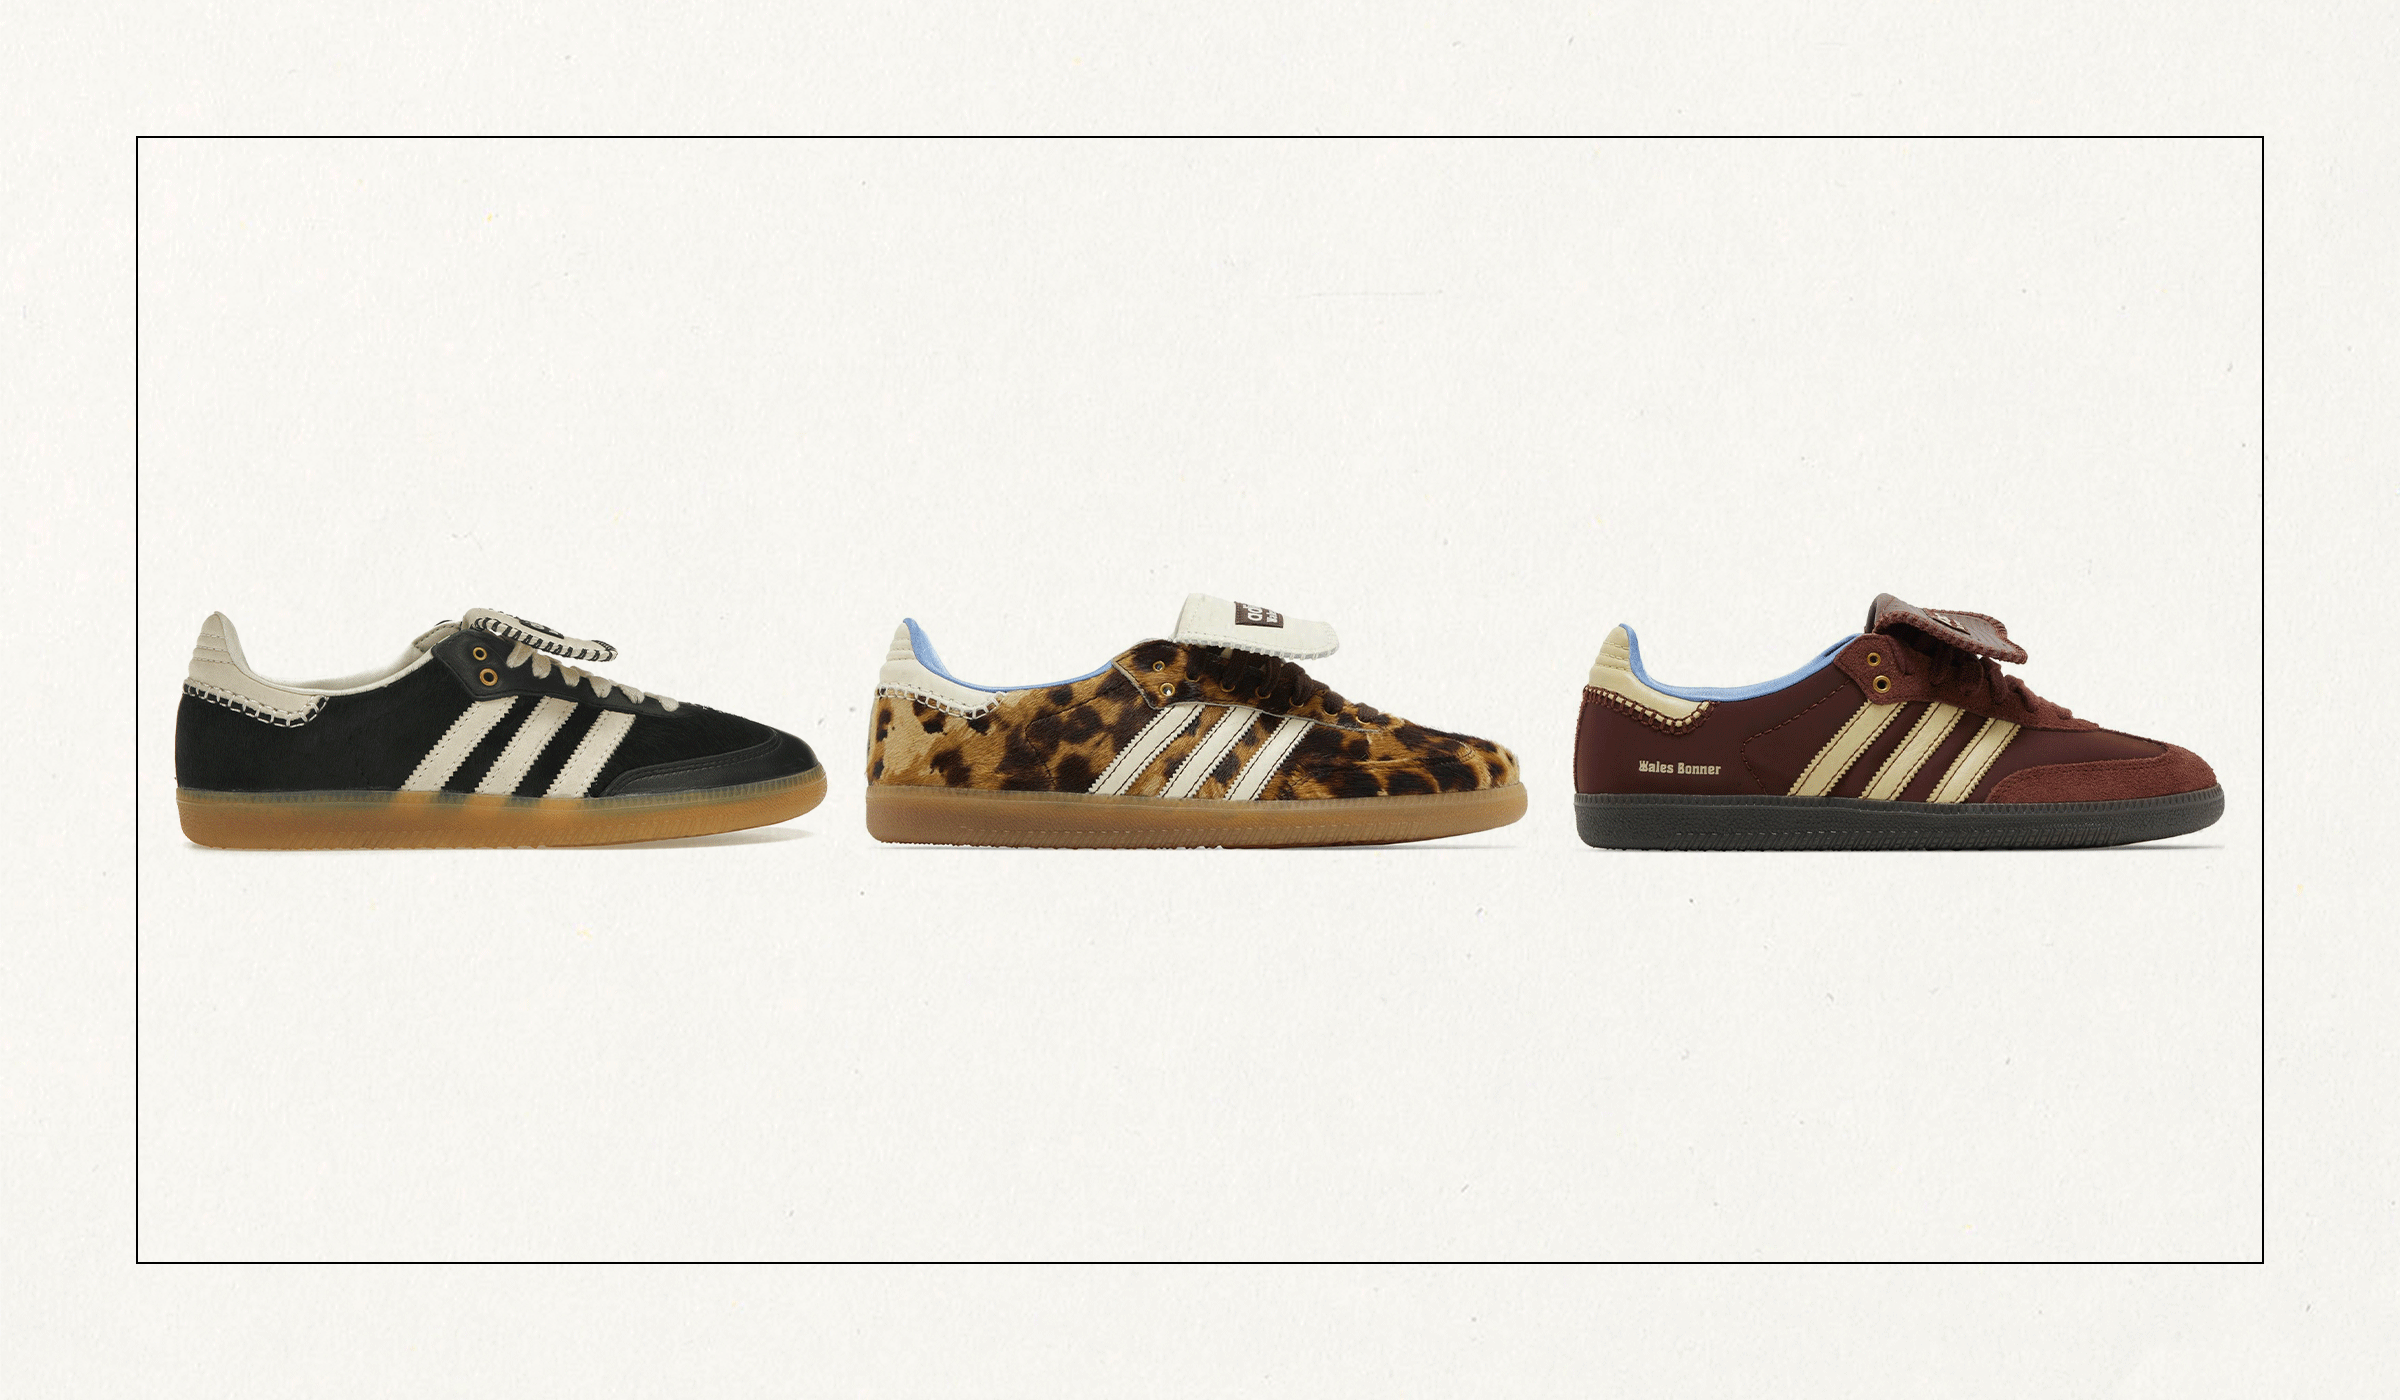 moving gif of different Adidas Samba sneakers